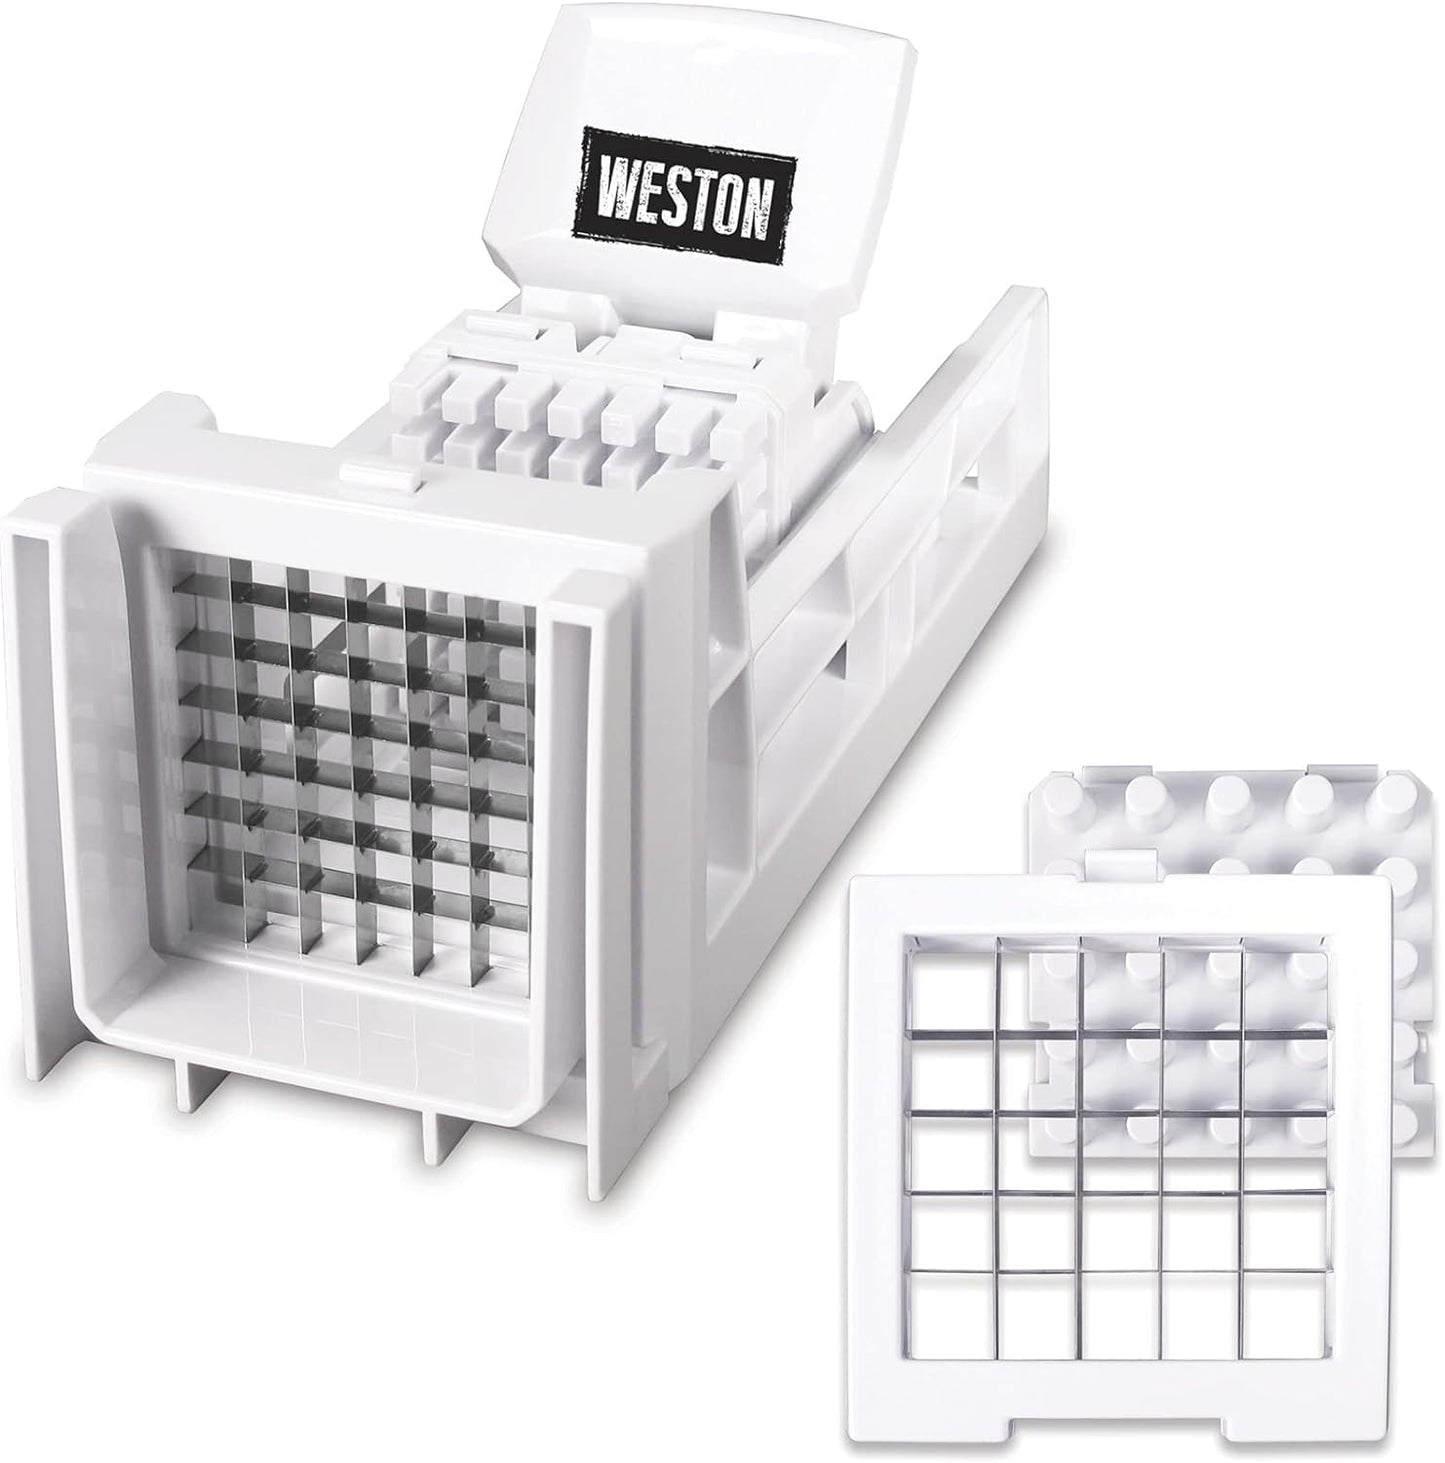 Weston French Fry Cutter Machine and Veggie Dicer with 2 Stainless Steel Cutting Blades, White